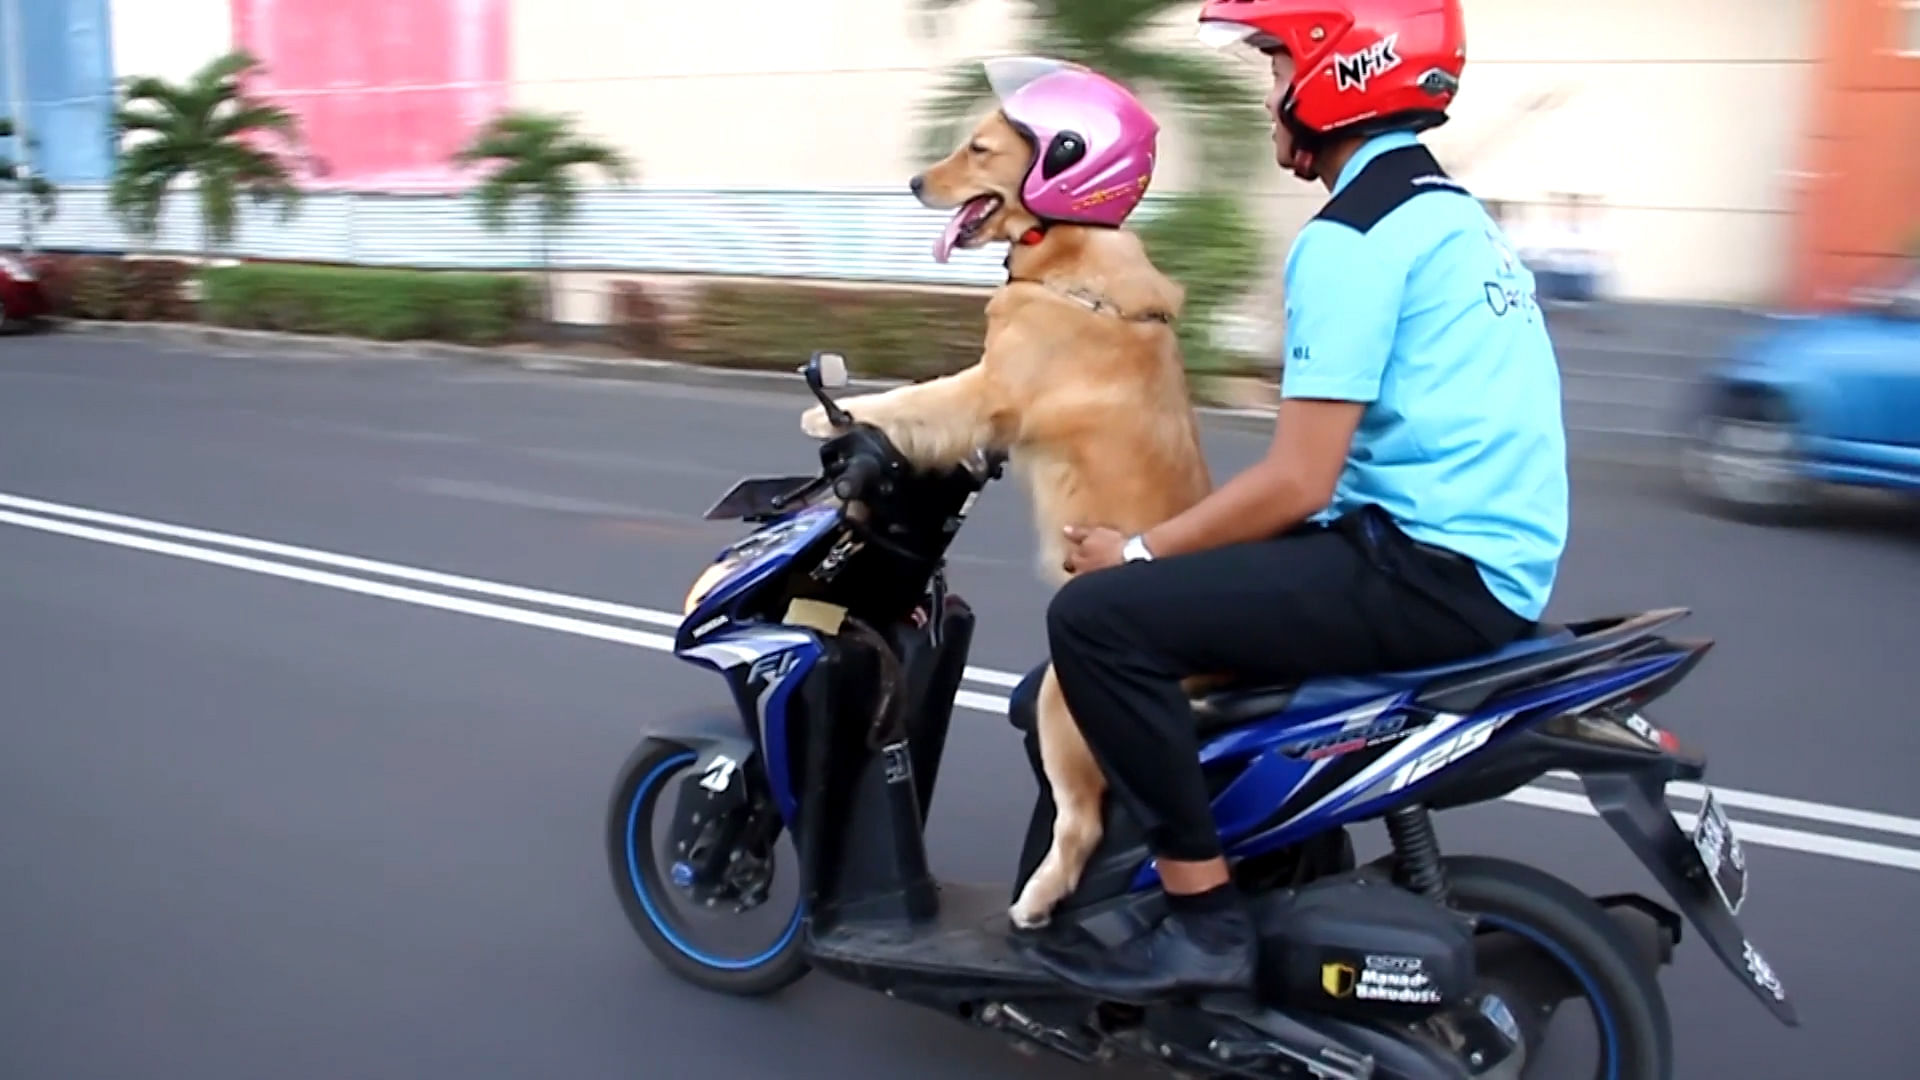 Stylish dog, Sydney rides her scooter in Indonesia (Photo: AP/Cater News screengrab)